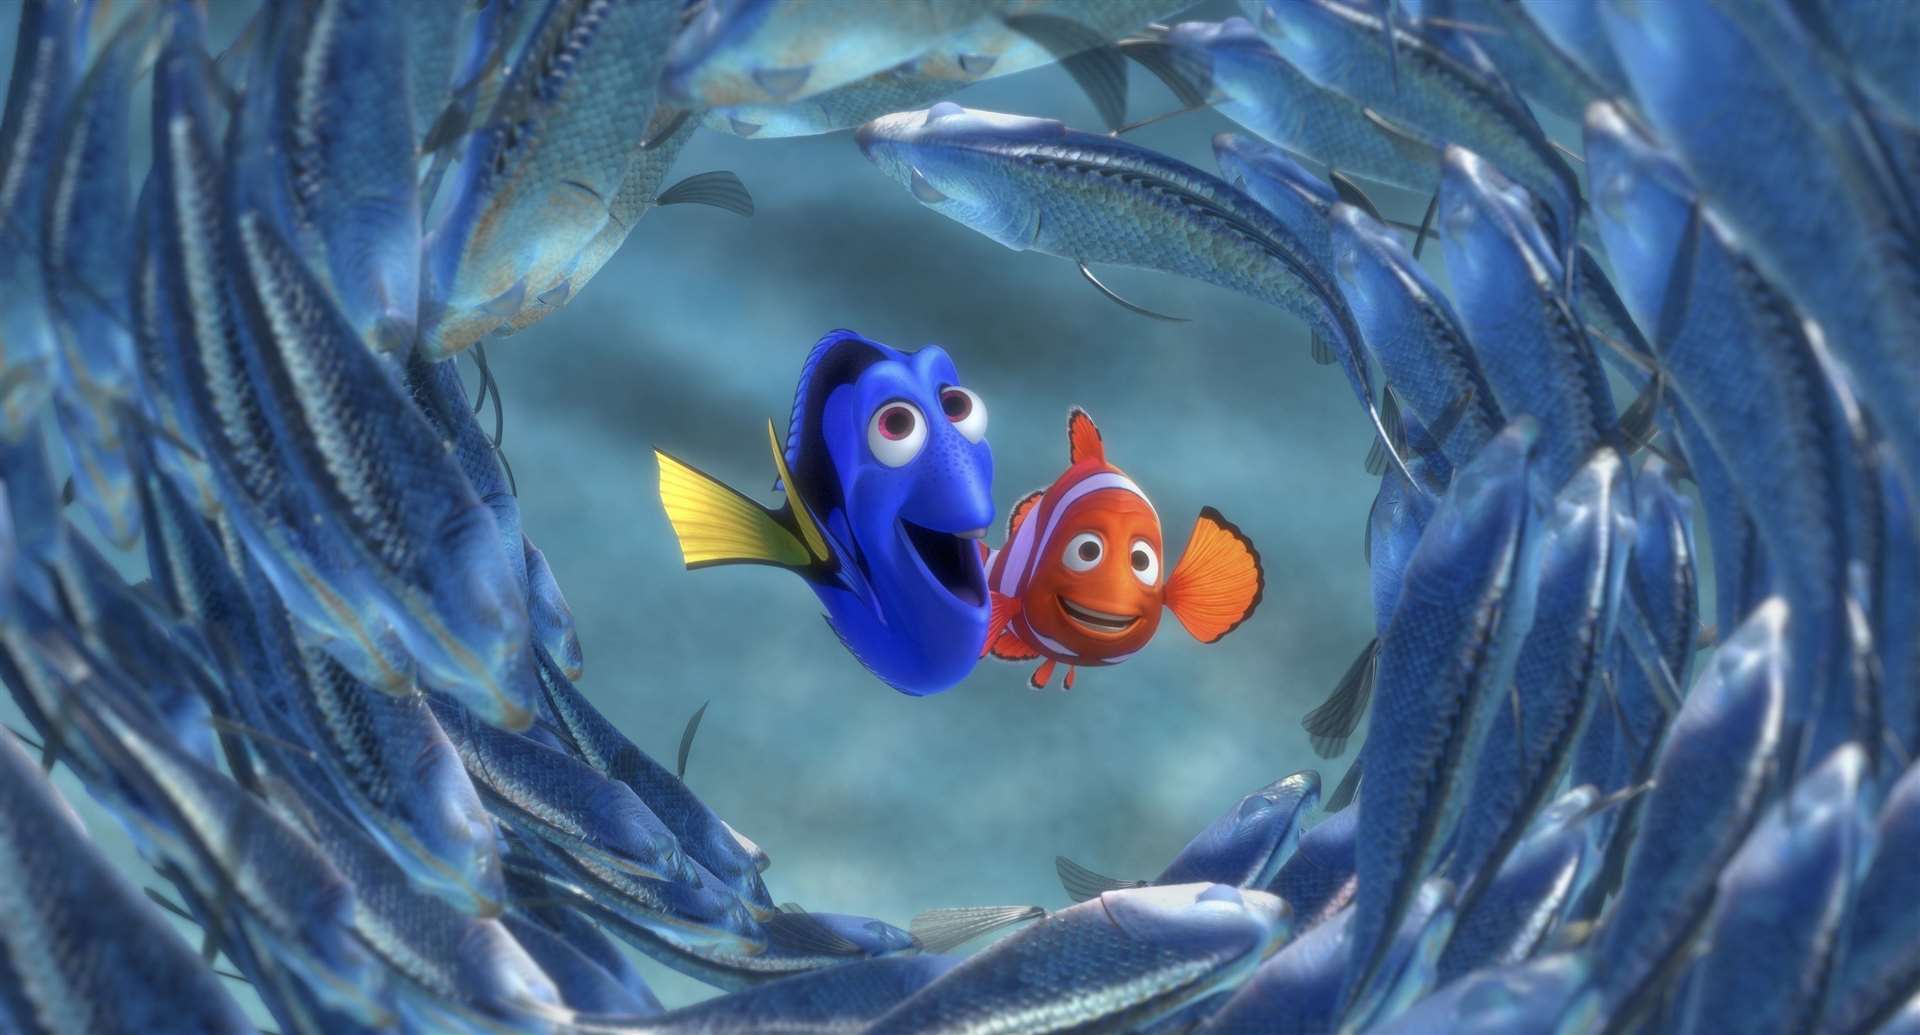 Finding Nemo by Walt Disney will be screened at Dreamland